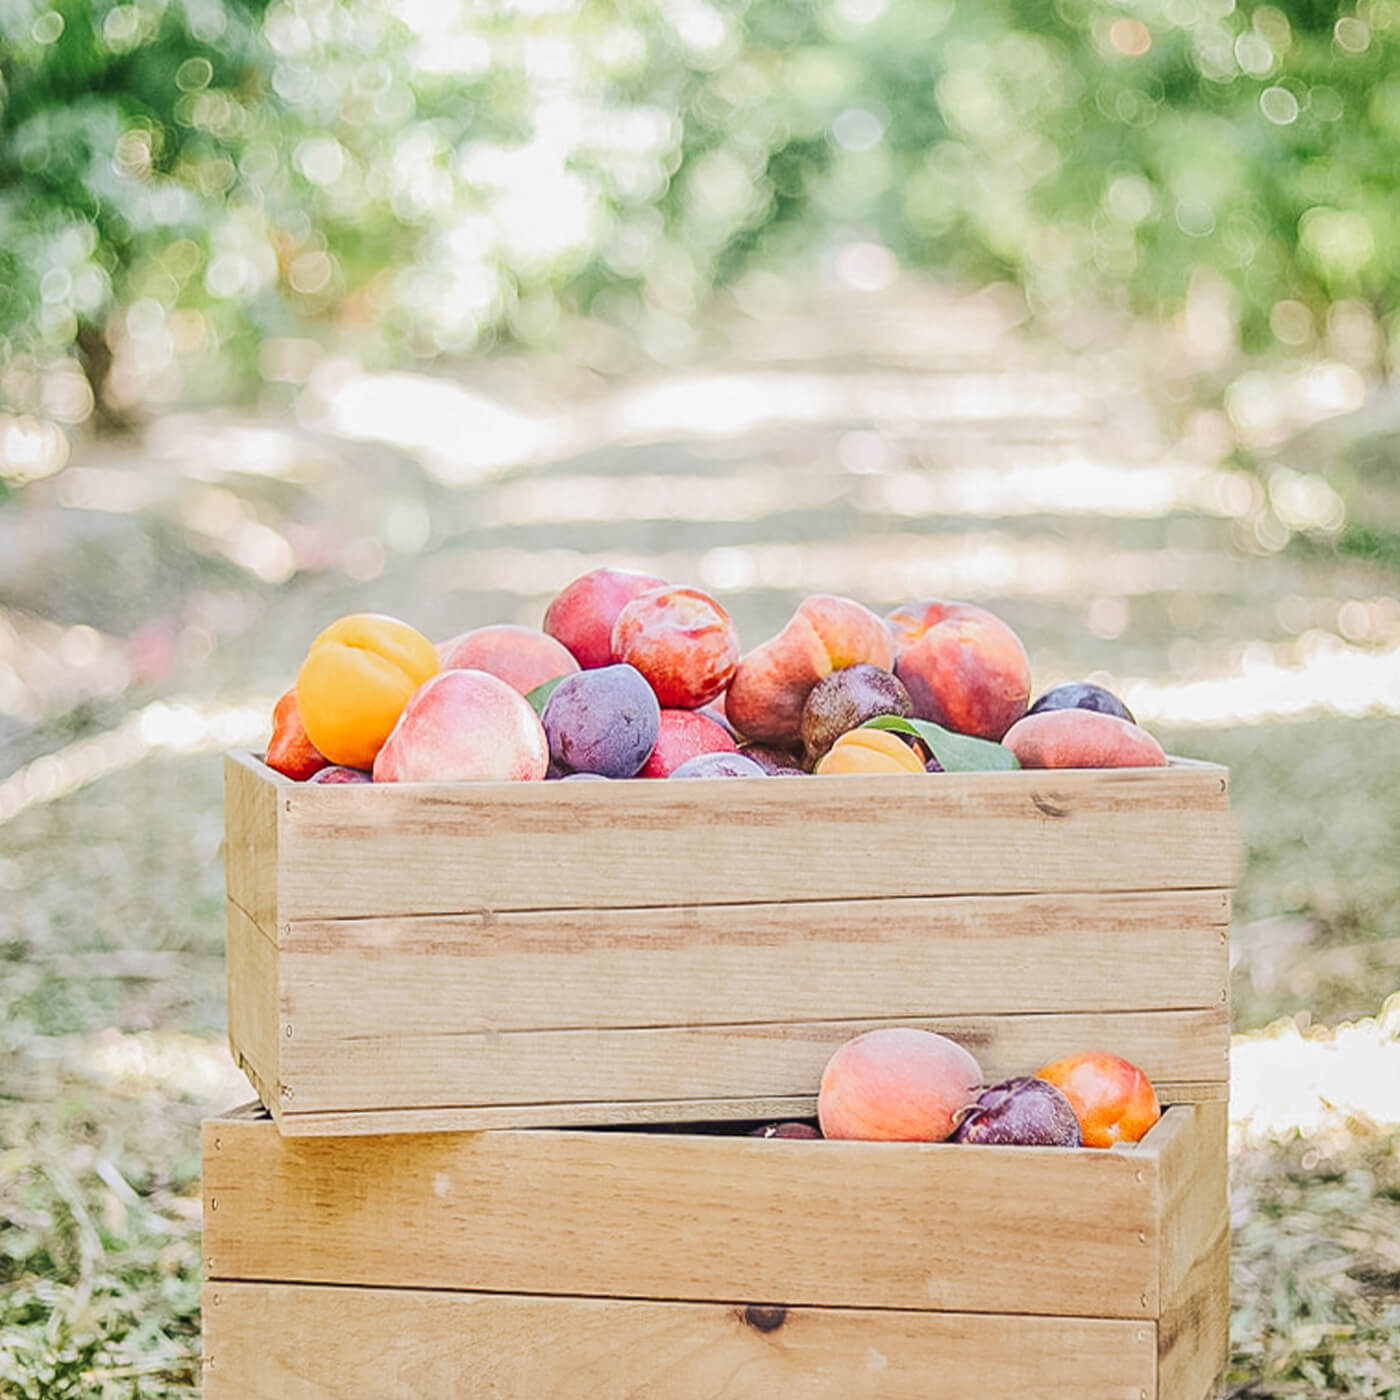 Image of crate of plumcots